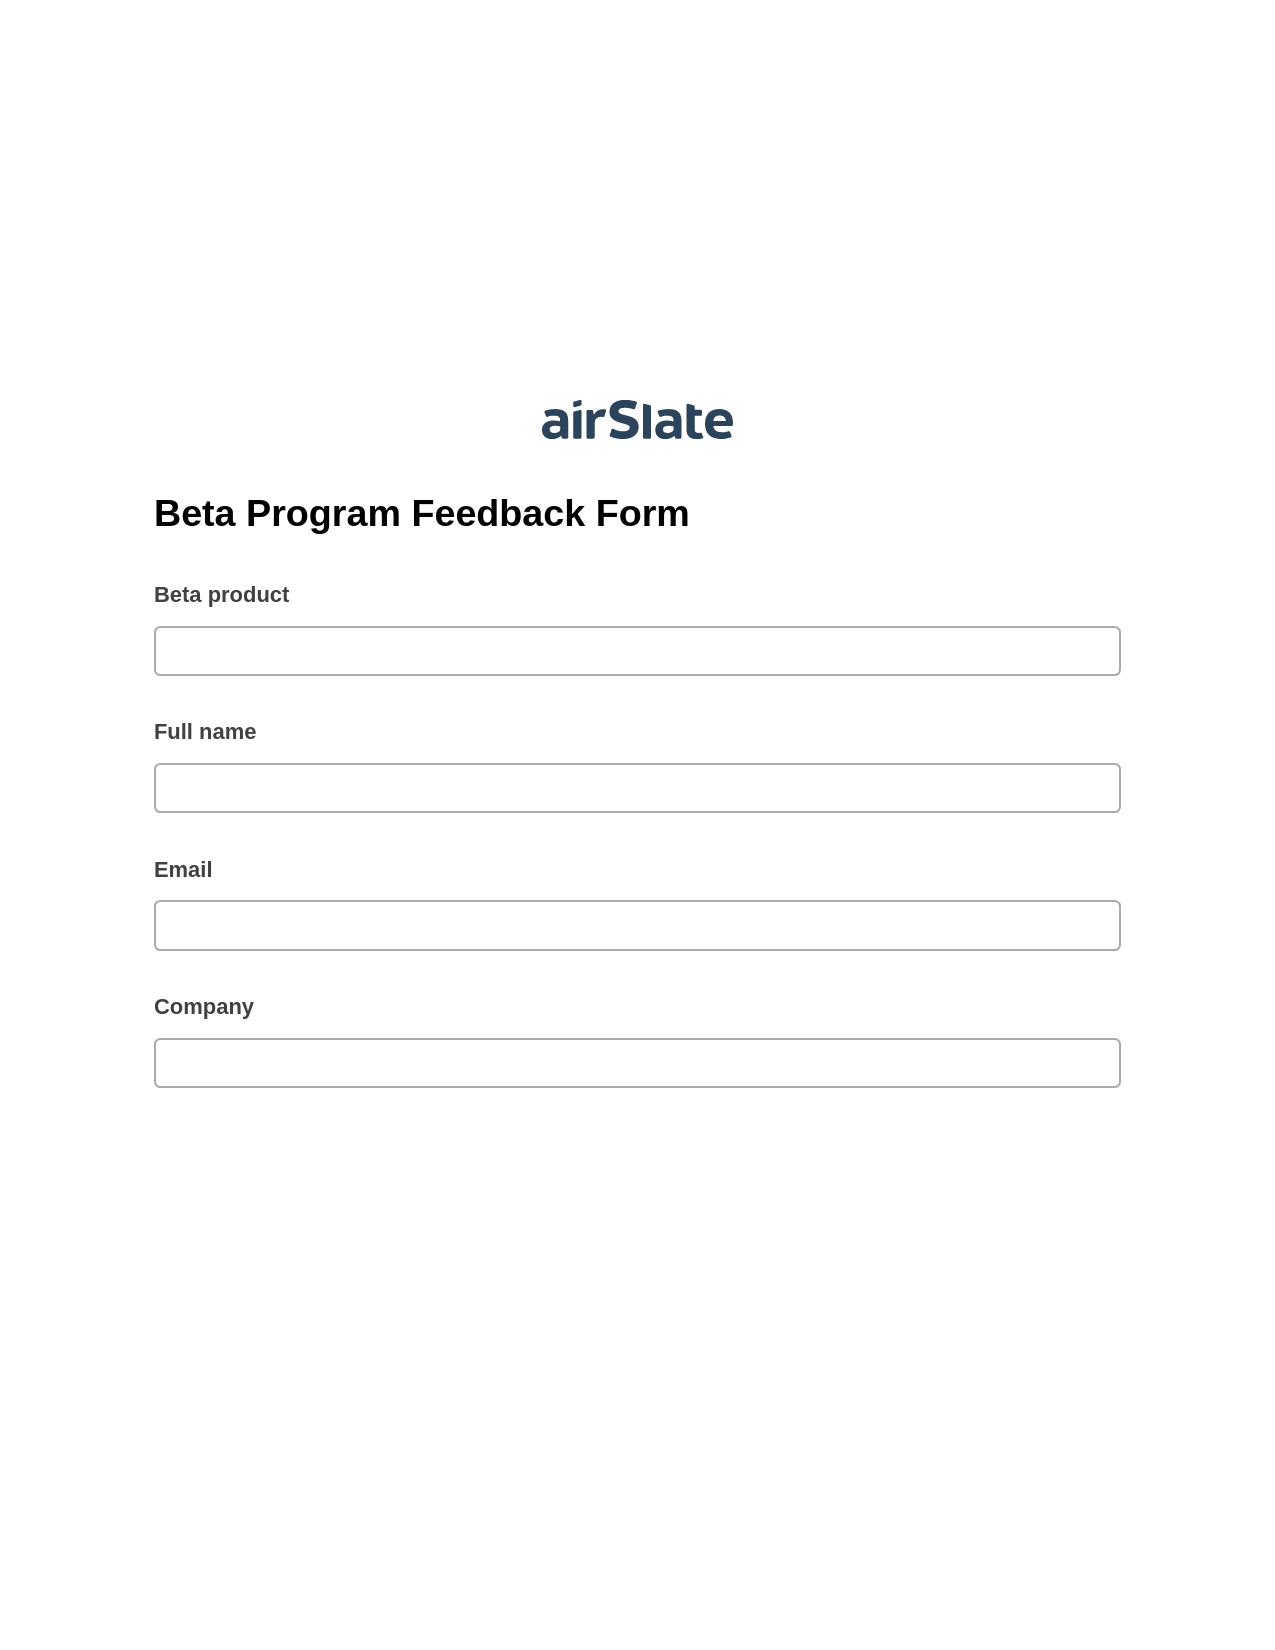 Multirole Beta Program Feedback Form Pre-fill Document Bot, Update MS Dynamics 365 Records Bot, Export to NetSuite Record Bot